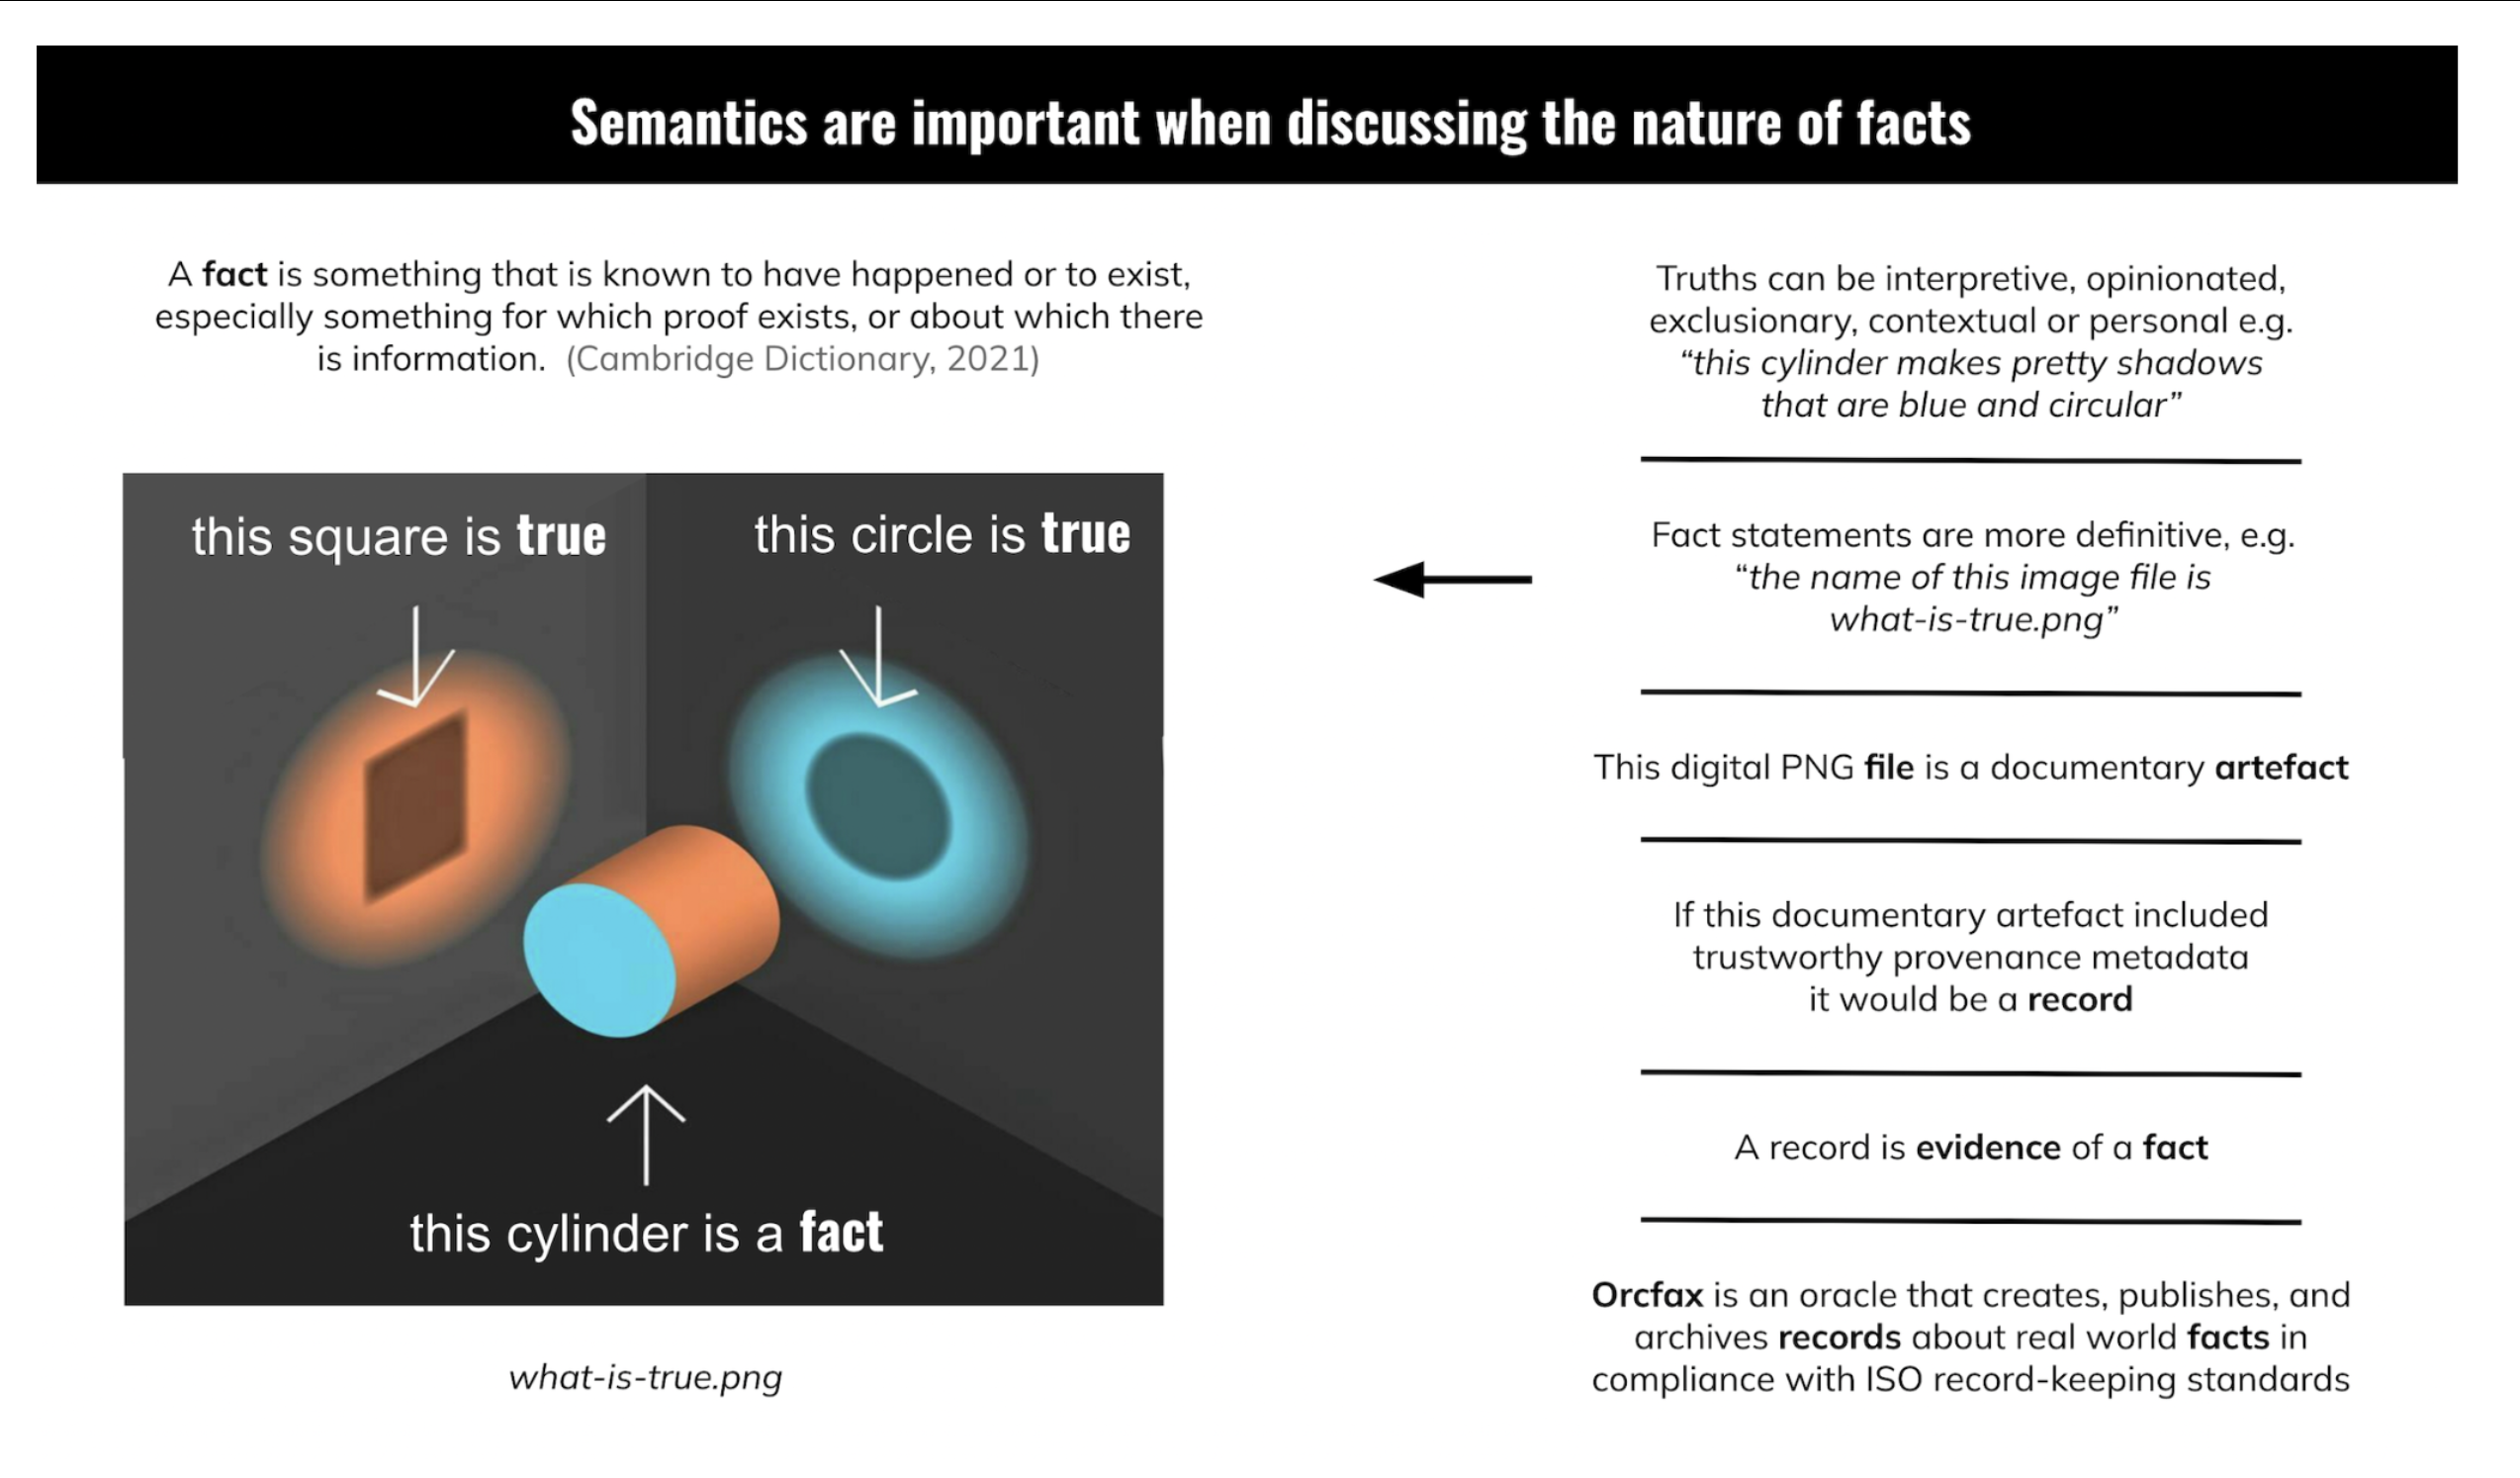 The nature of facts